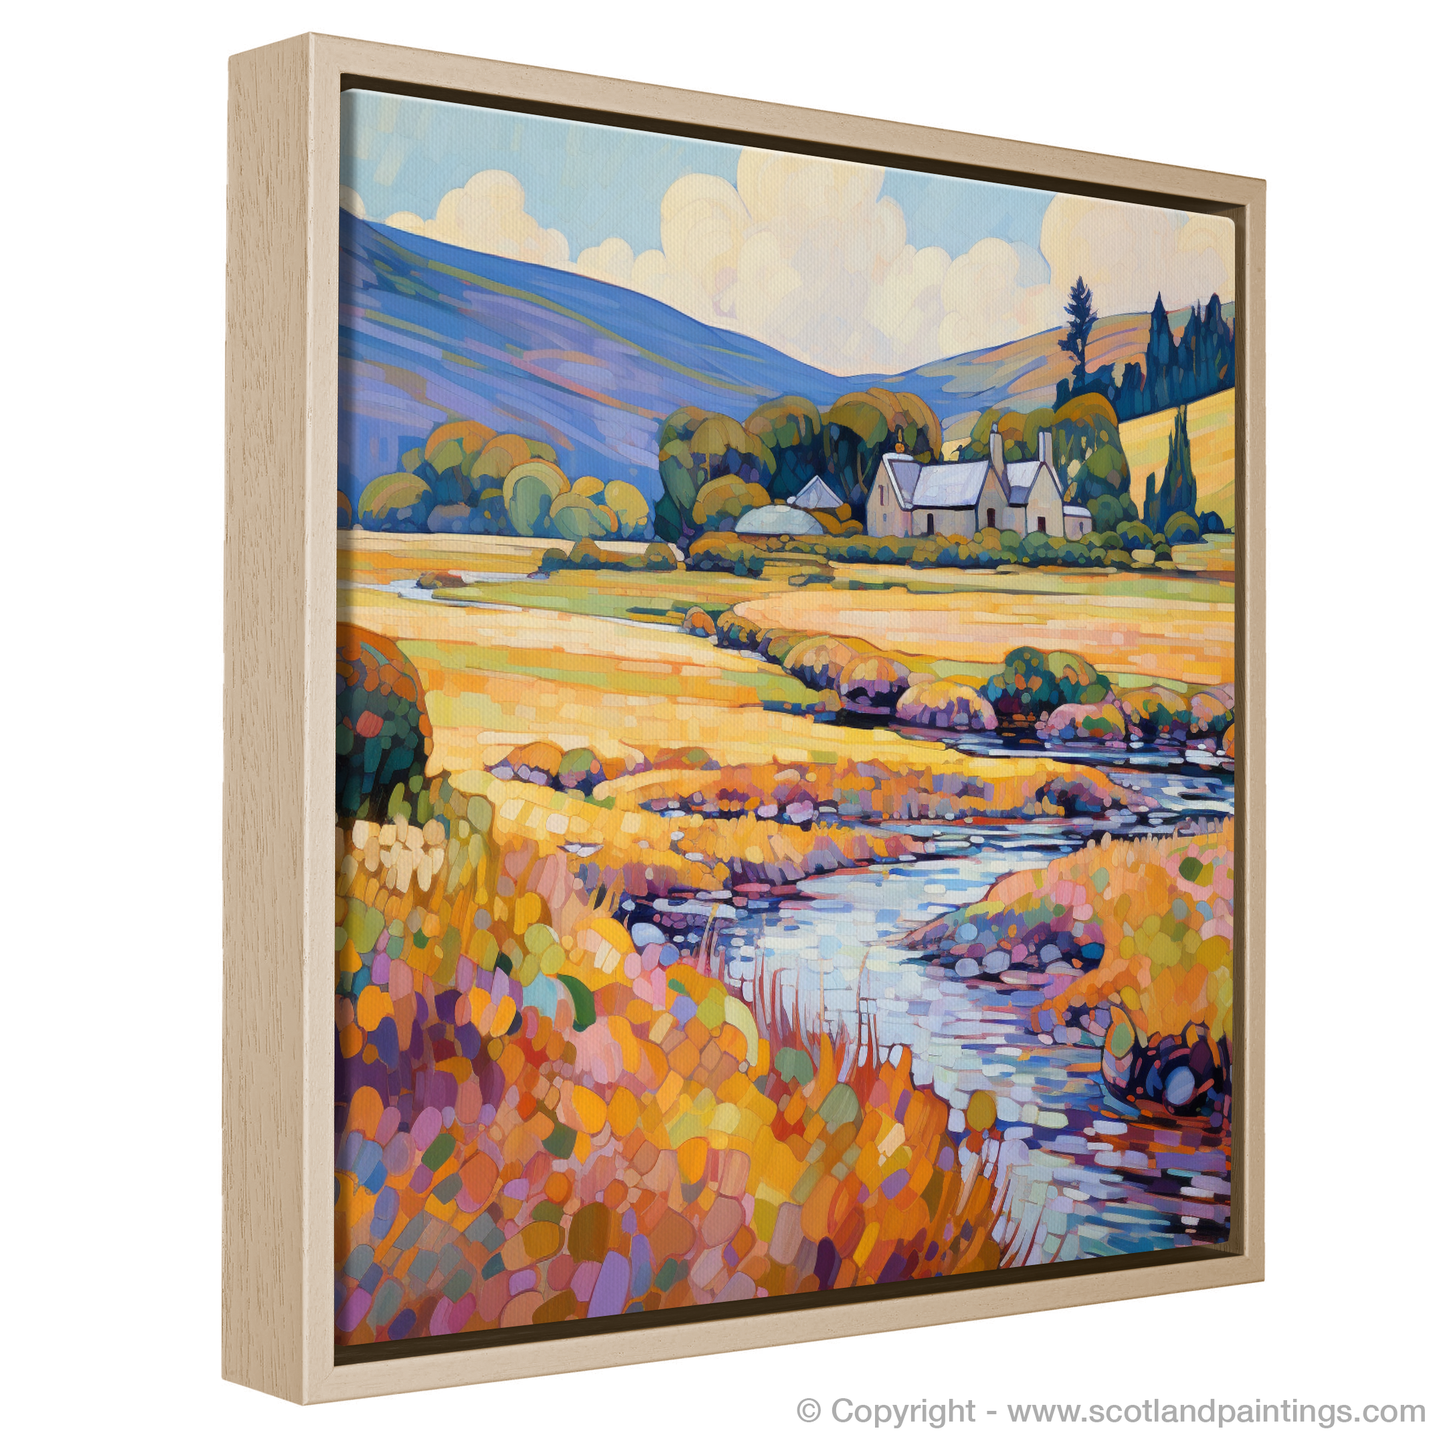 Painting and Art Print of Glenlivet, Moray in summer entitled "Summer Serenade in Glenlivet Moray".